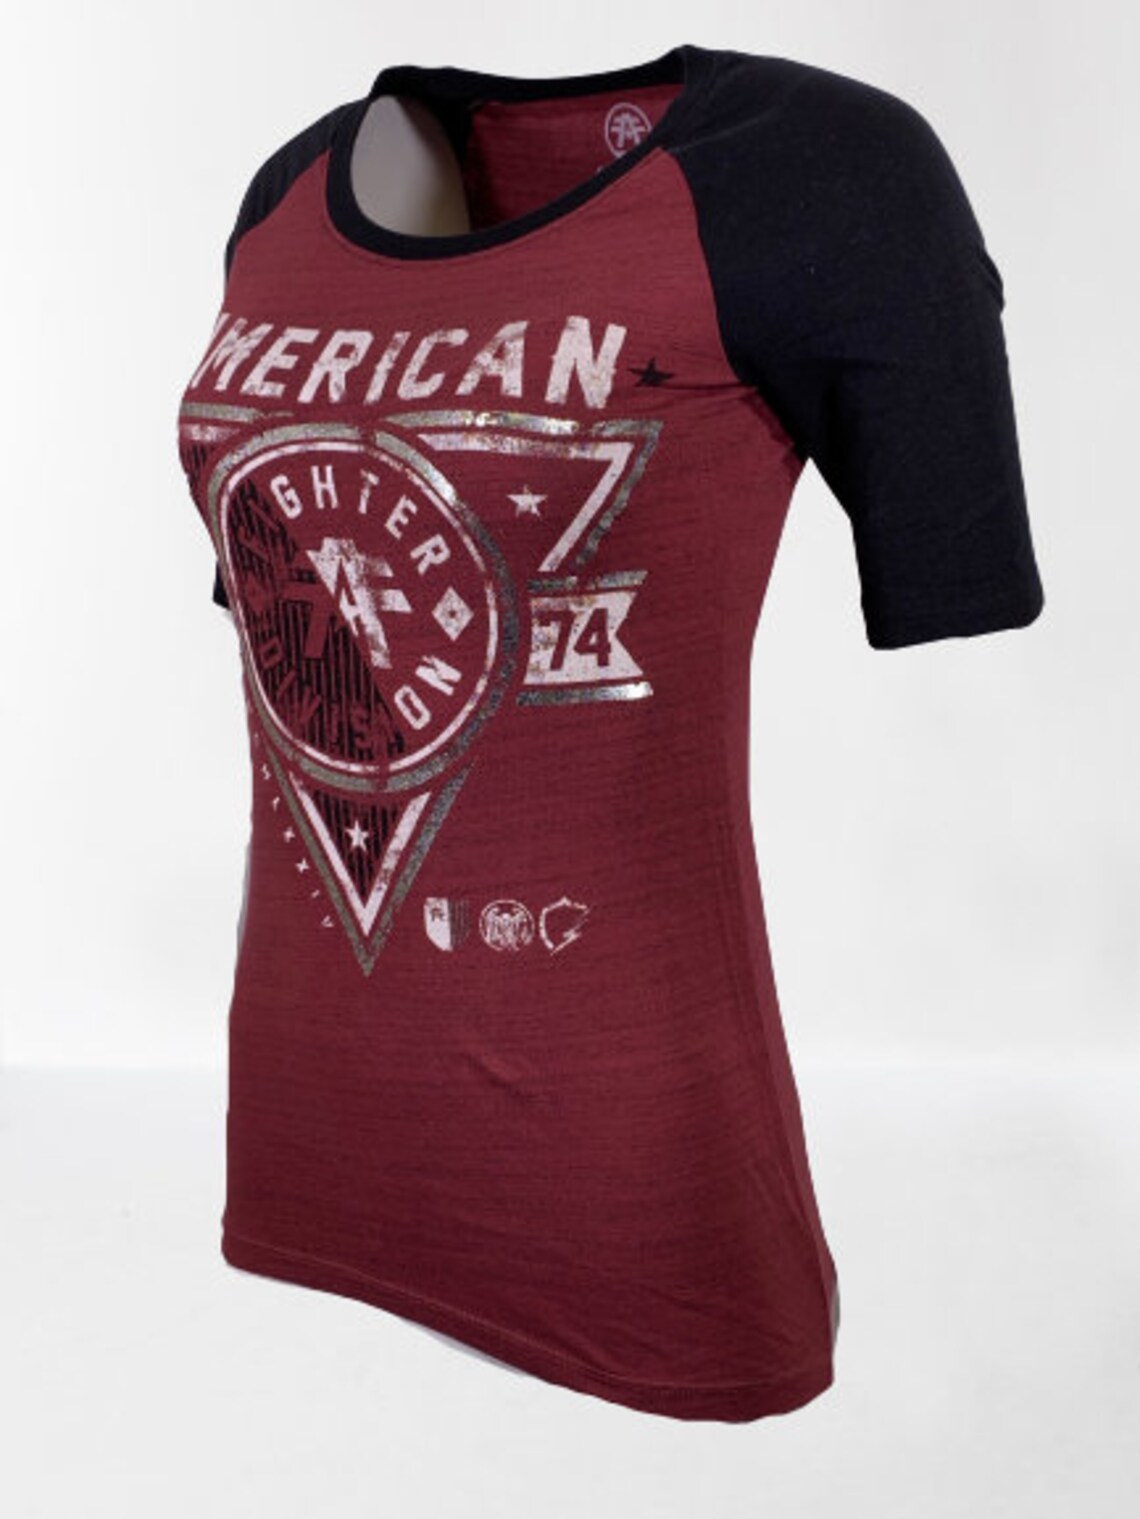 AMERICAN FIGHTER Women's T-shirt S/S Siena Heights Tee - Etsy